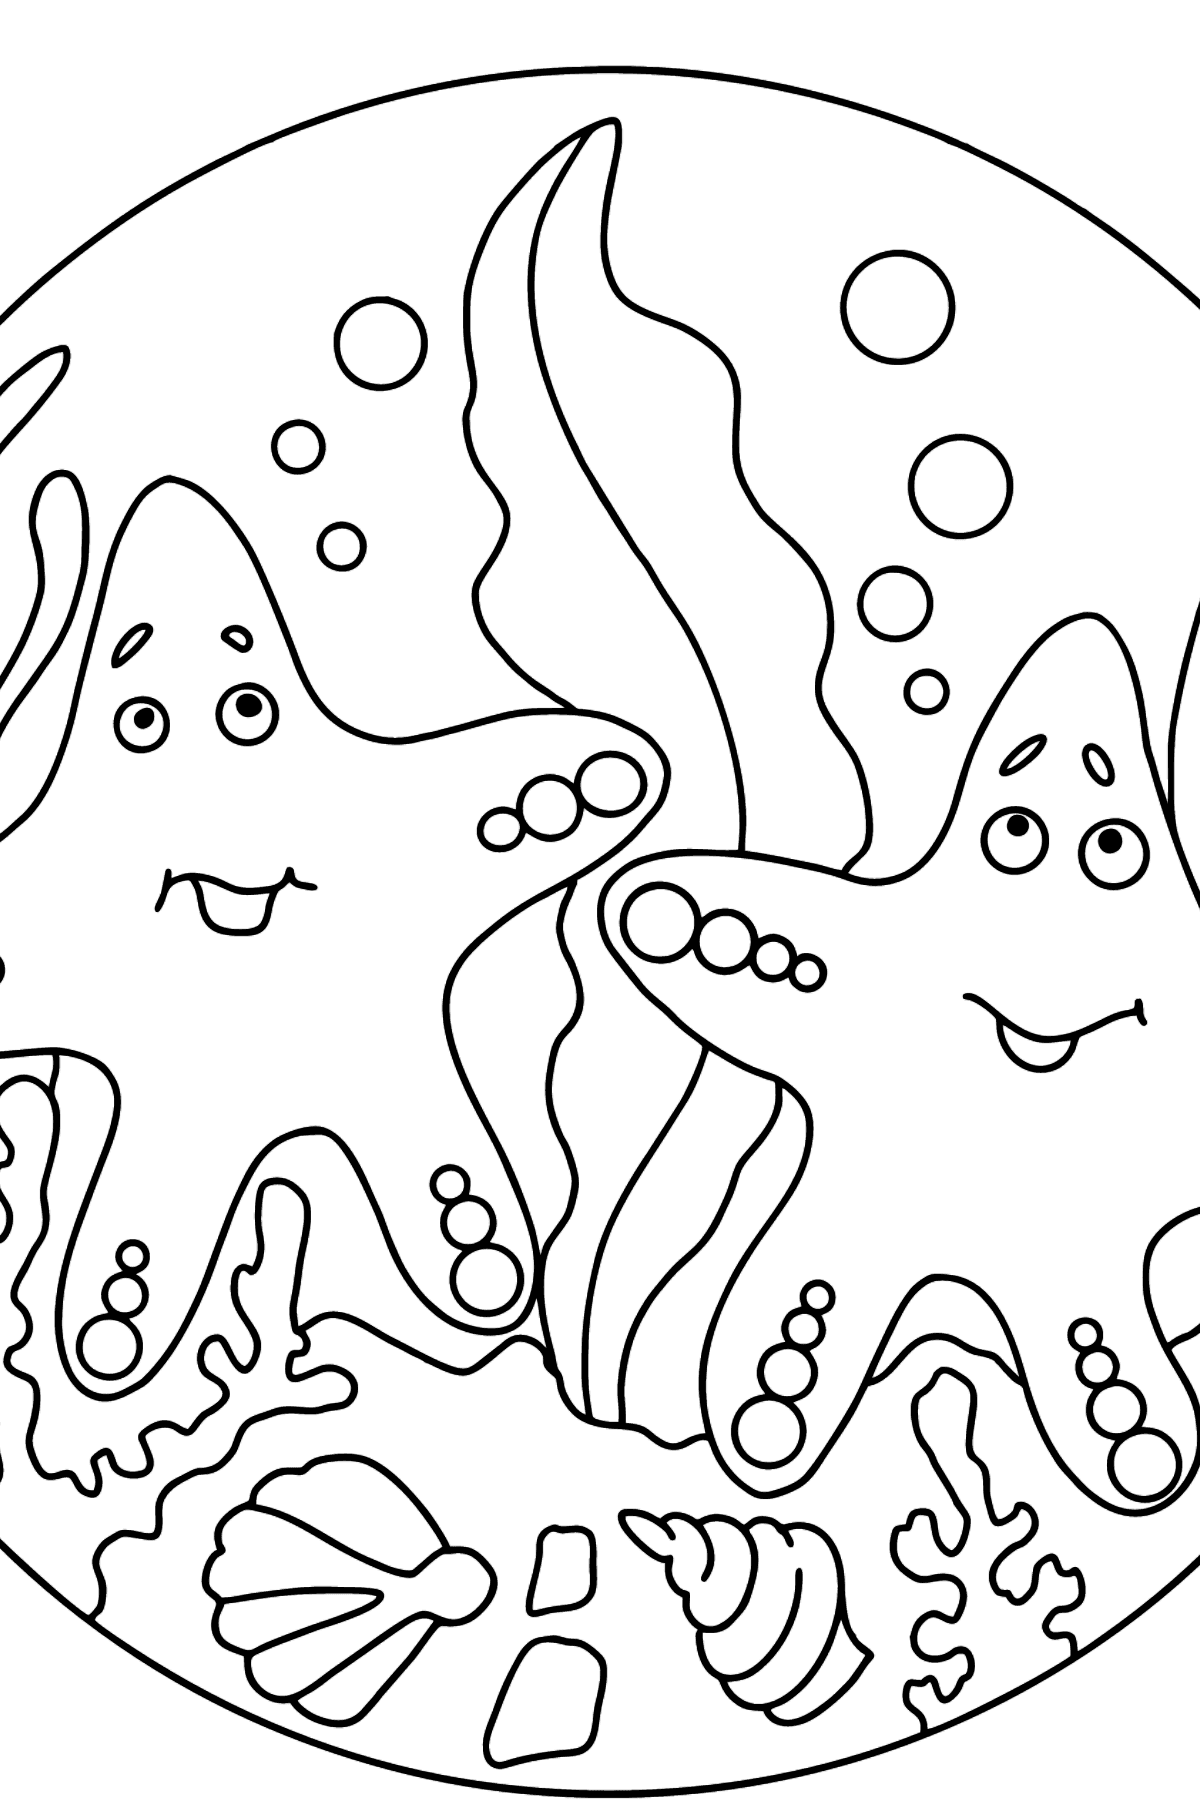 Cute Starfish are Playing Coloring Page - Coloring Pages for Kids